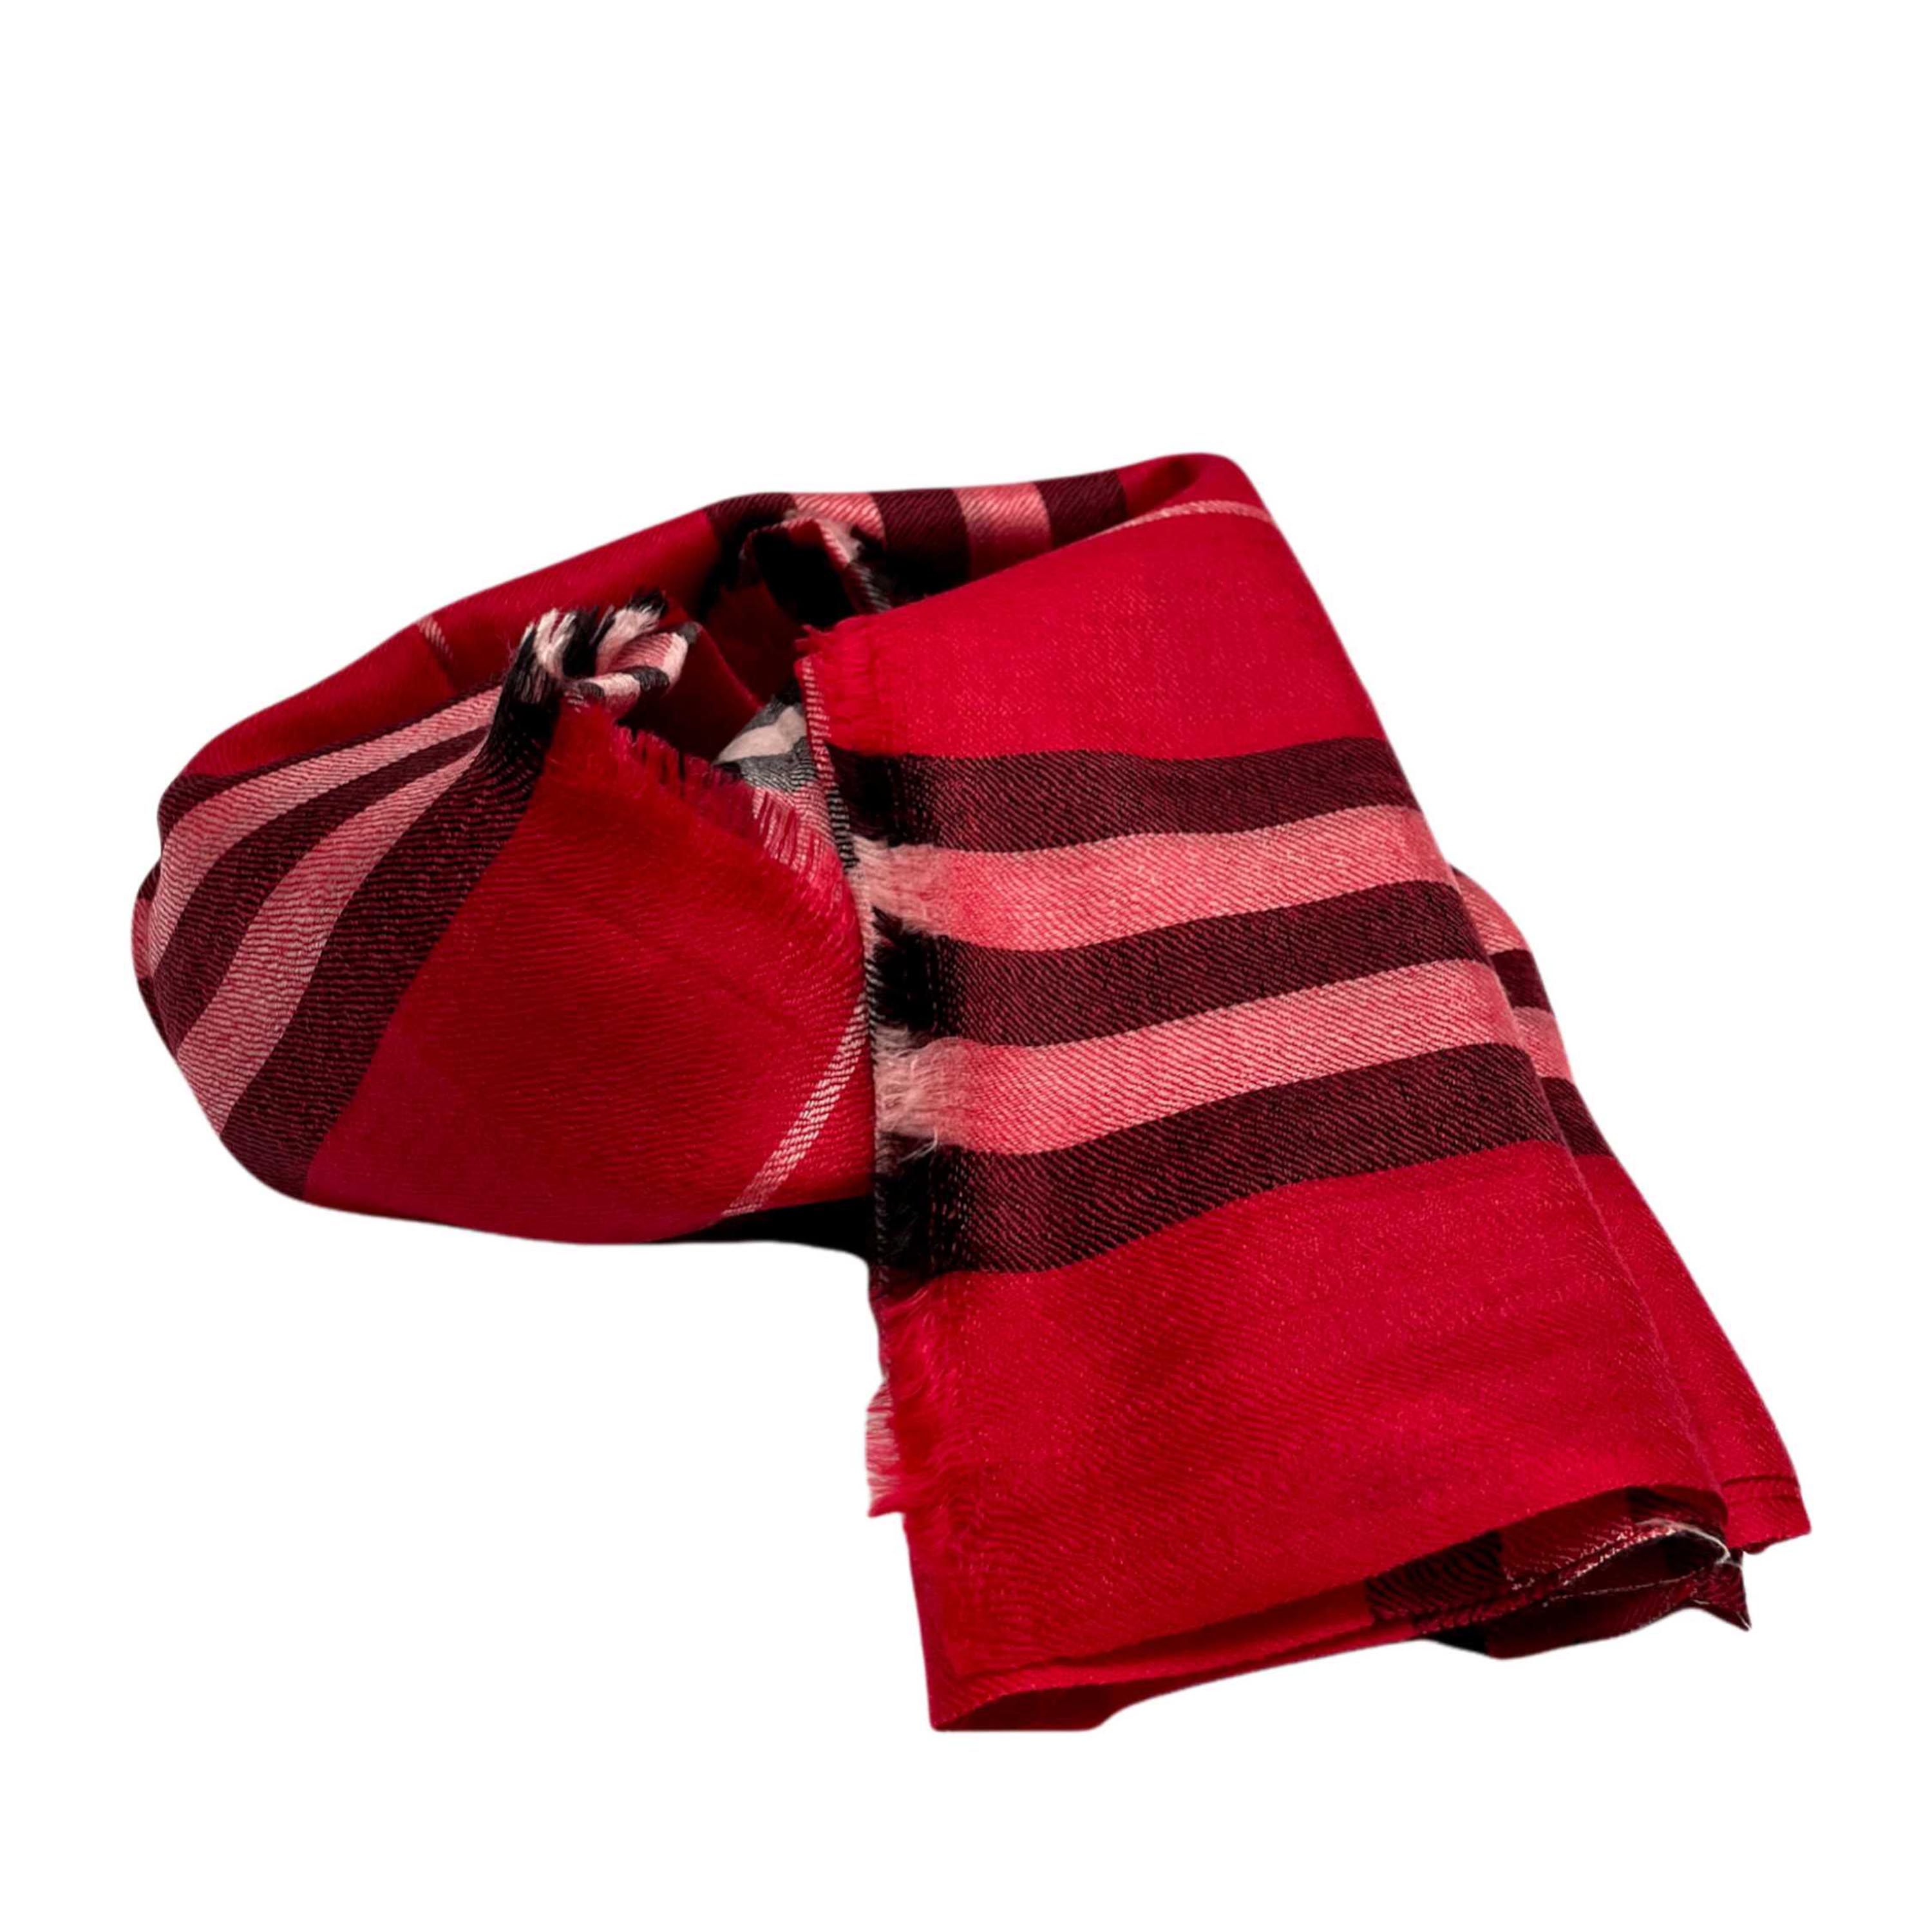 Ring Shawl,a Thin, Soft, And Light Shawl For All-weather Use, Two-ply Wool, Real Pashmina Wool, Red With Stripes